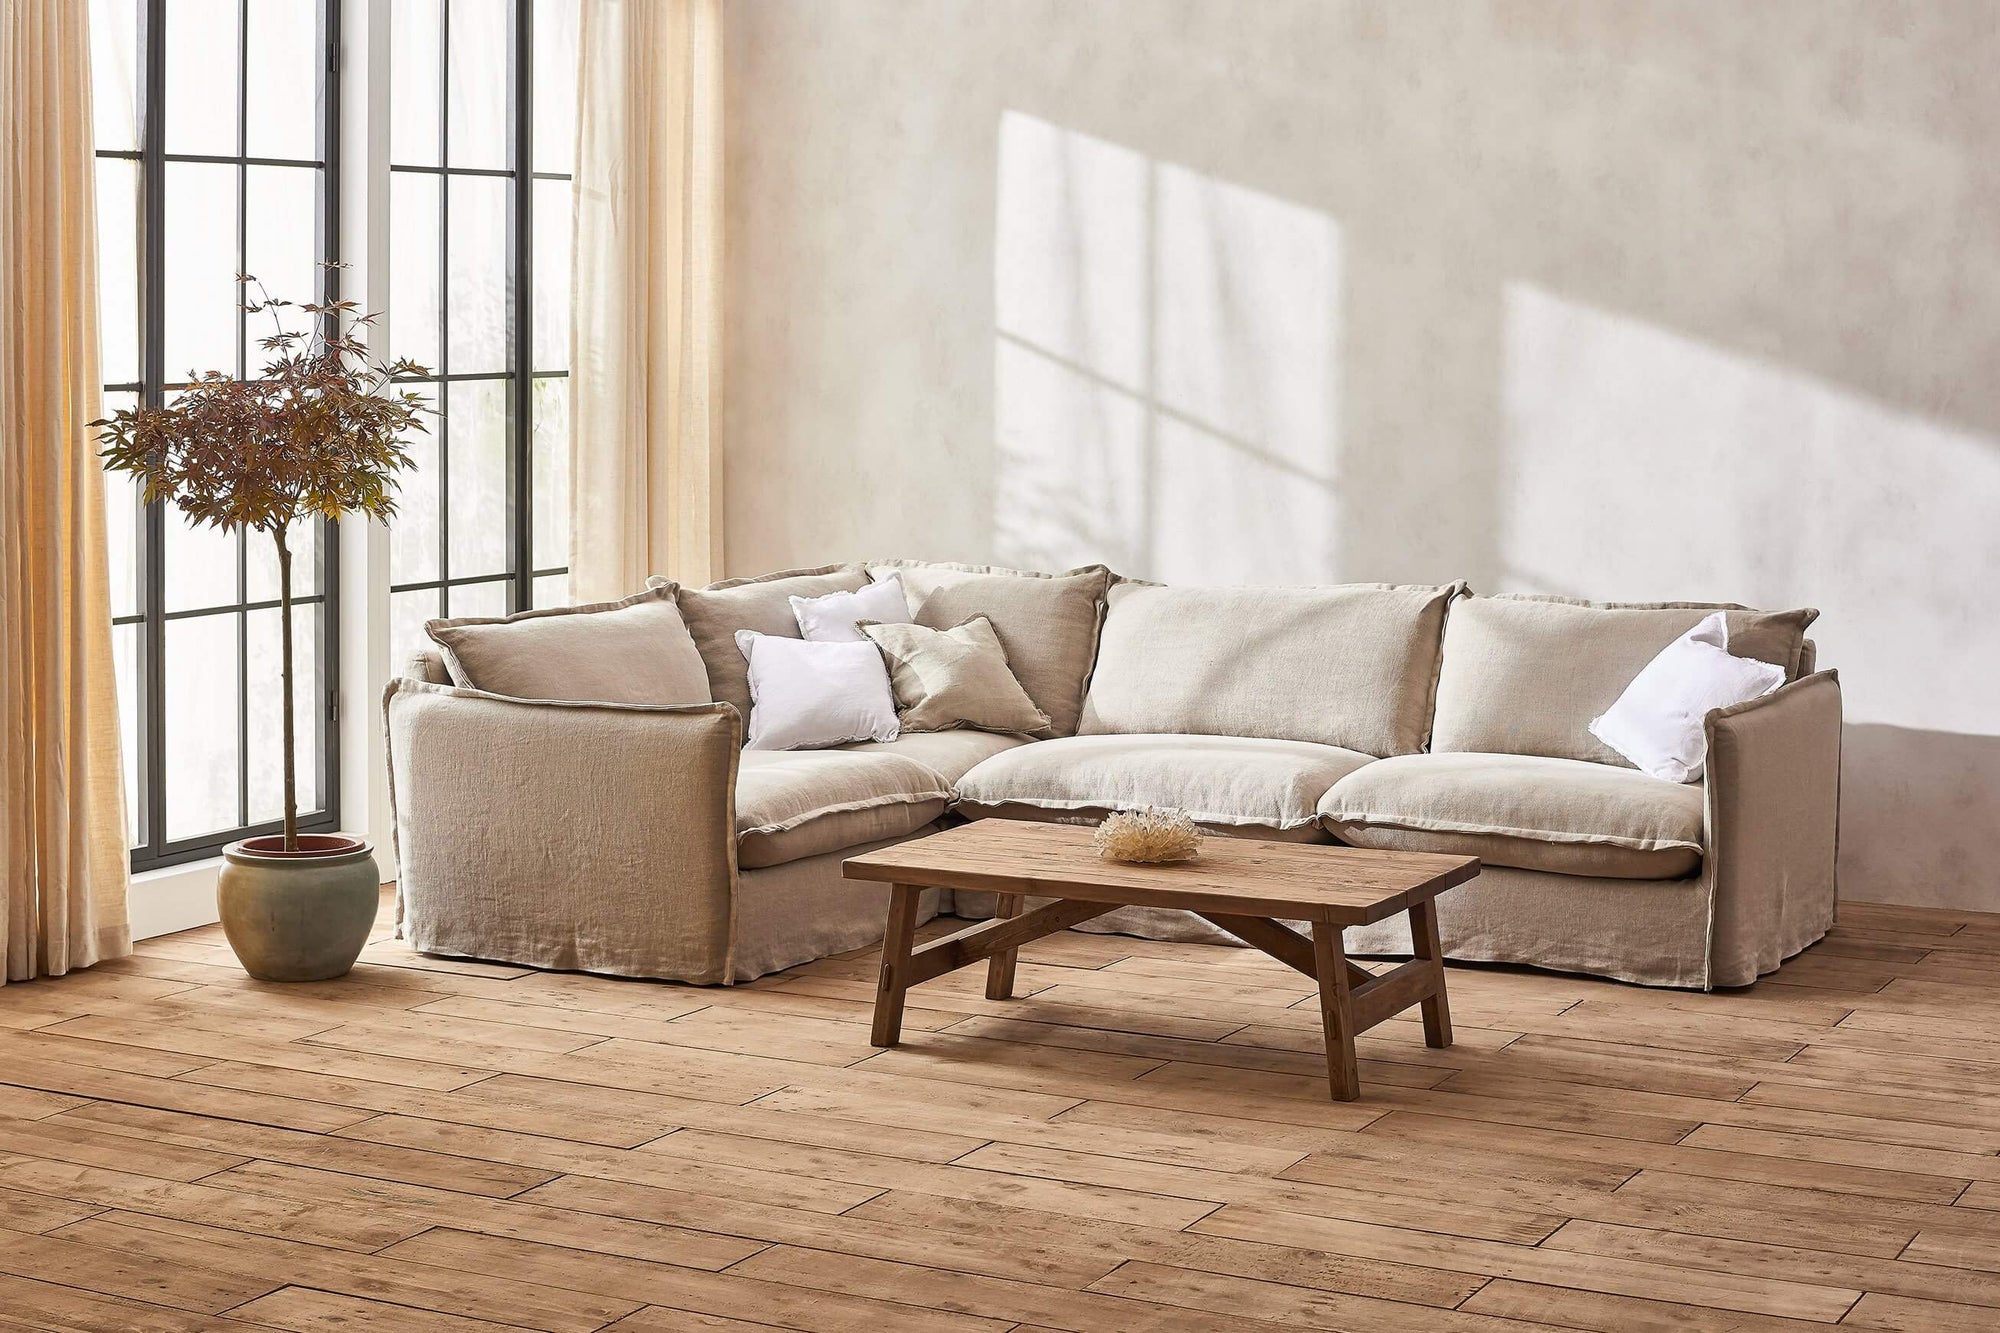 Neva L-Shape Sectional Sofa in Jasmine Rice, a light warm greige Medium Weight Linen, placed in a sunlit room with a coffee table and a small potted tree